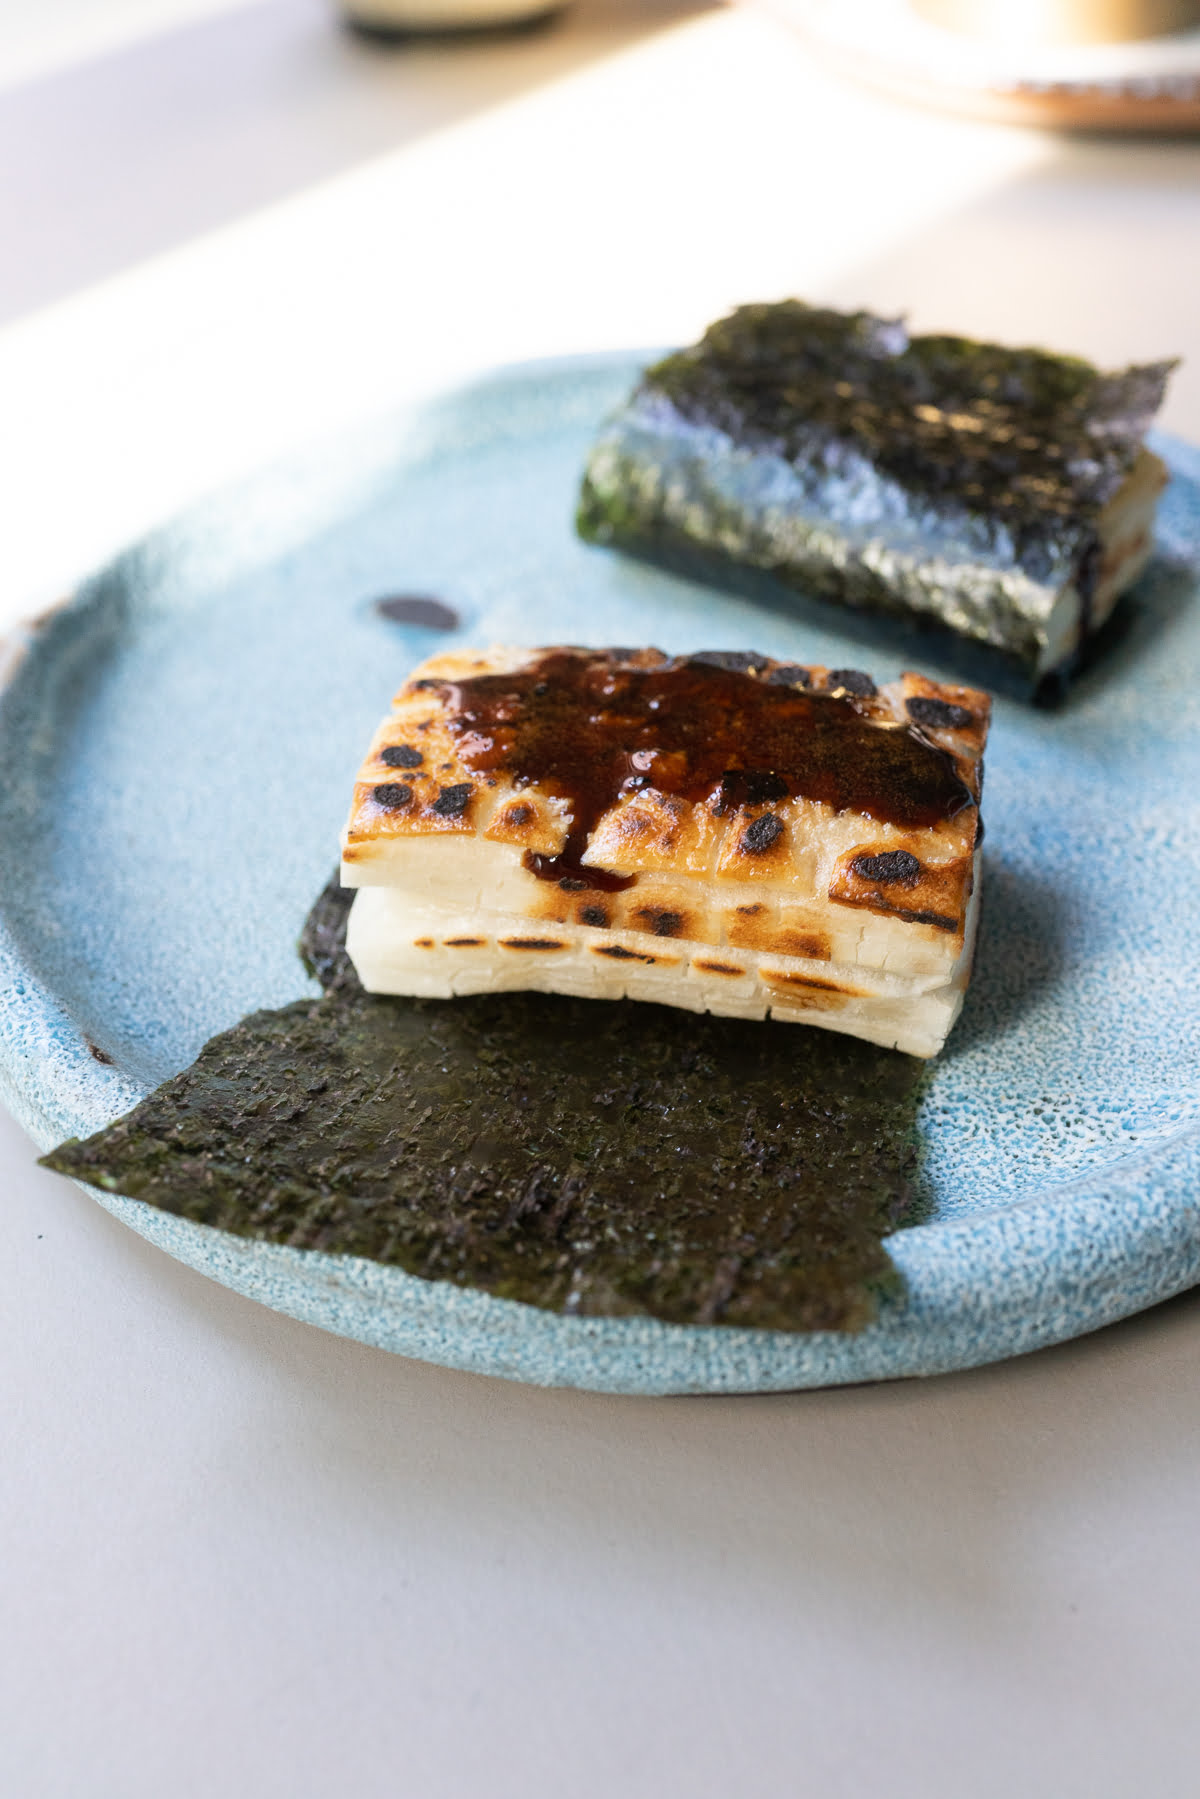 Prepared isobeyaki on a plate, ready to eat.